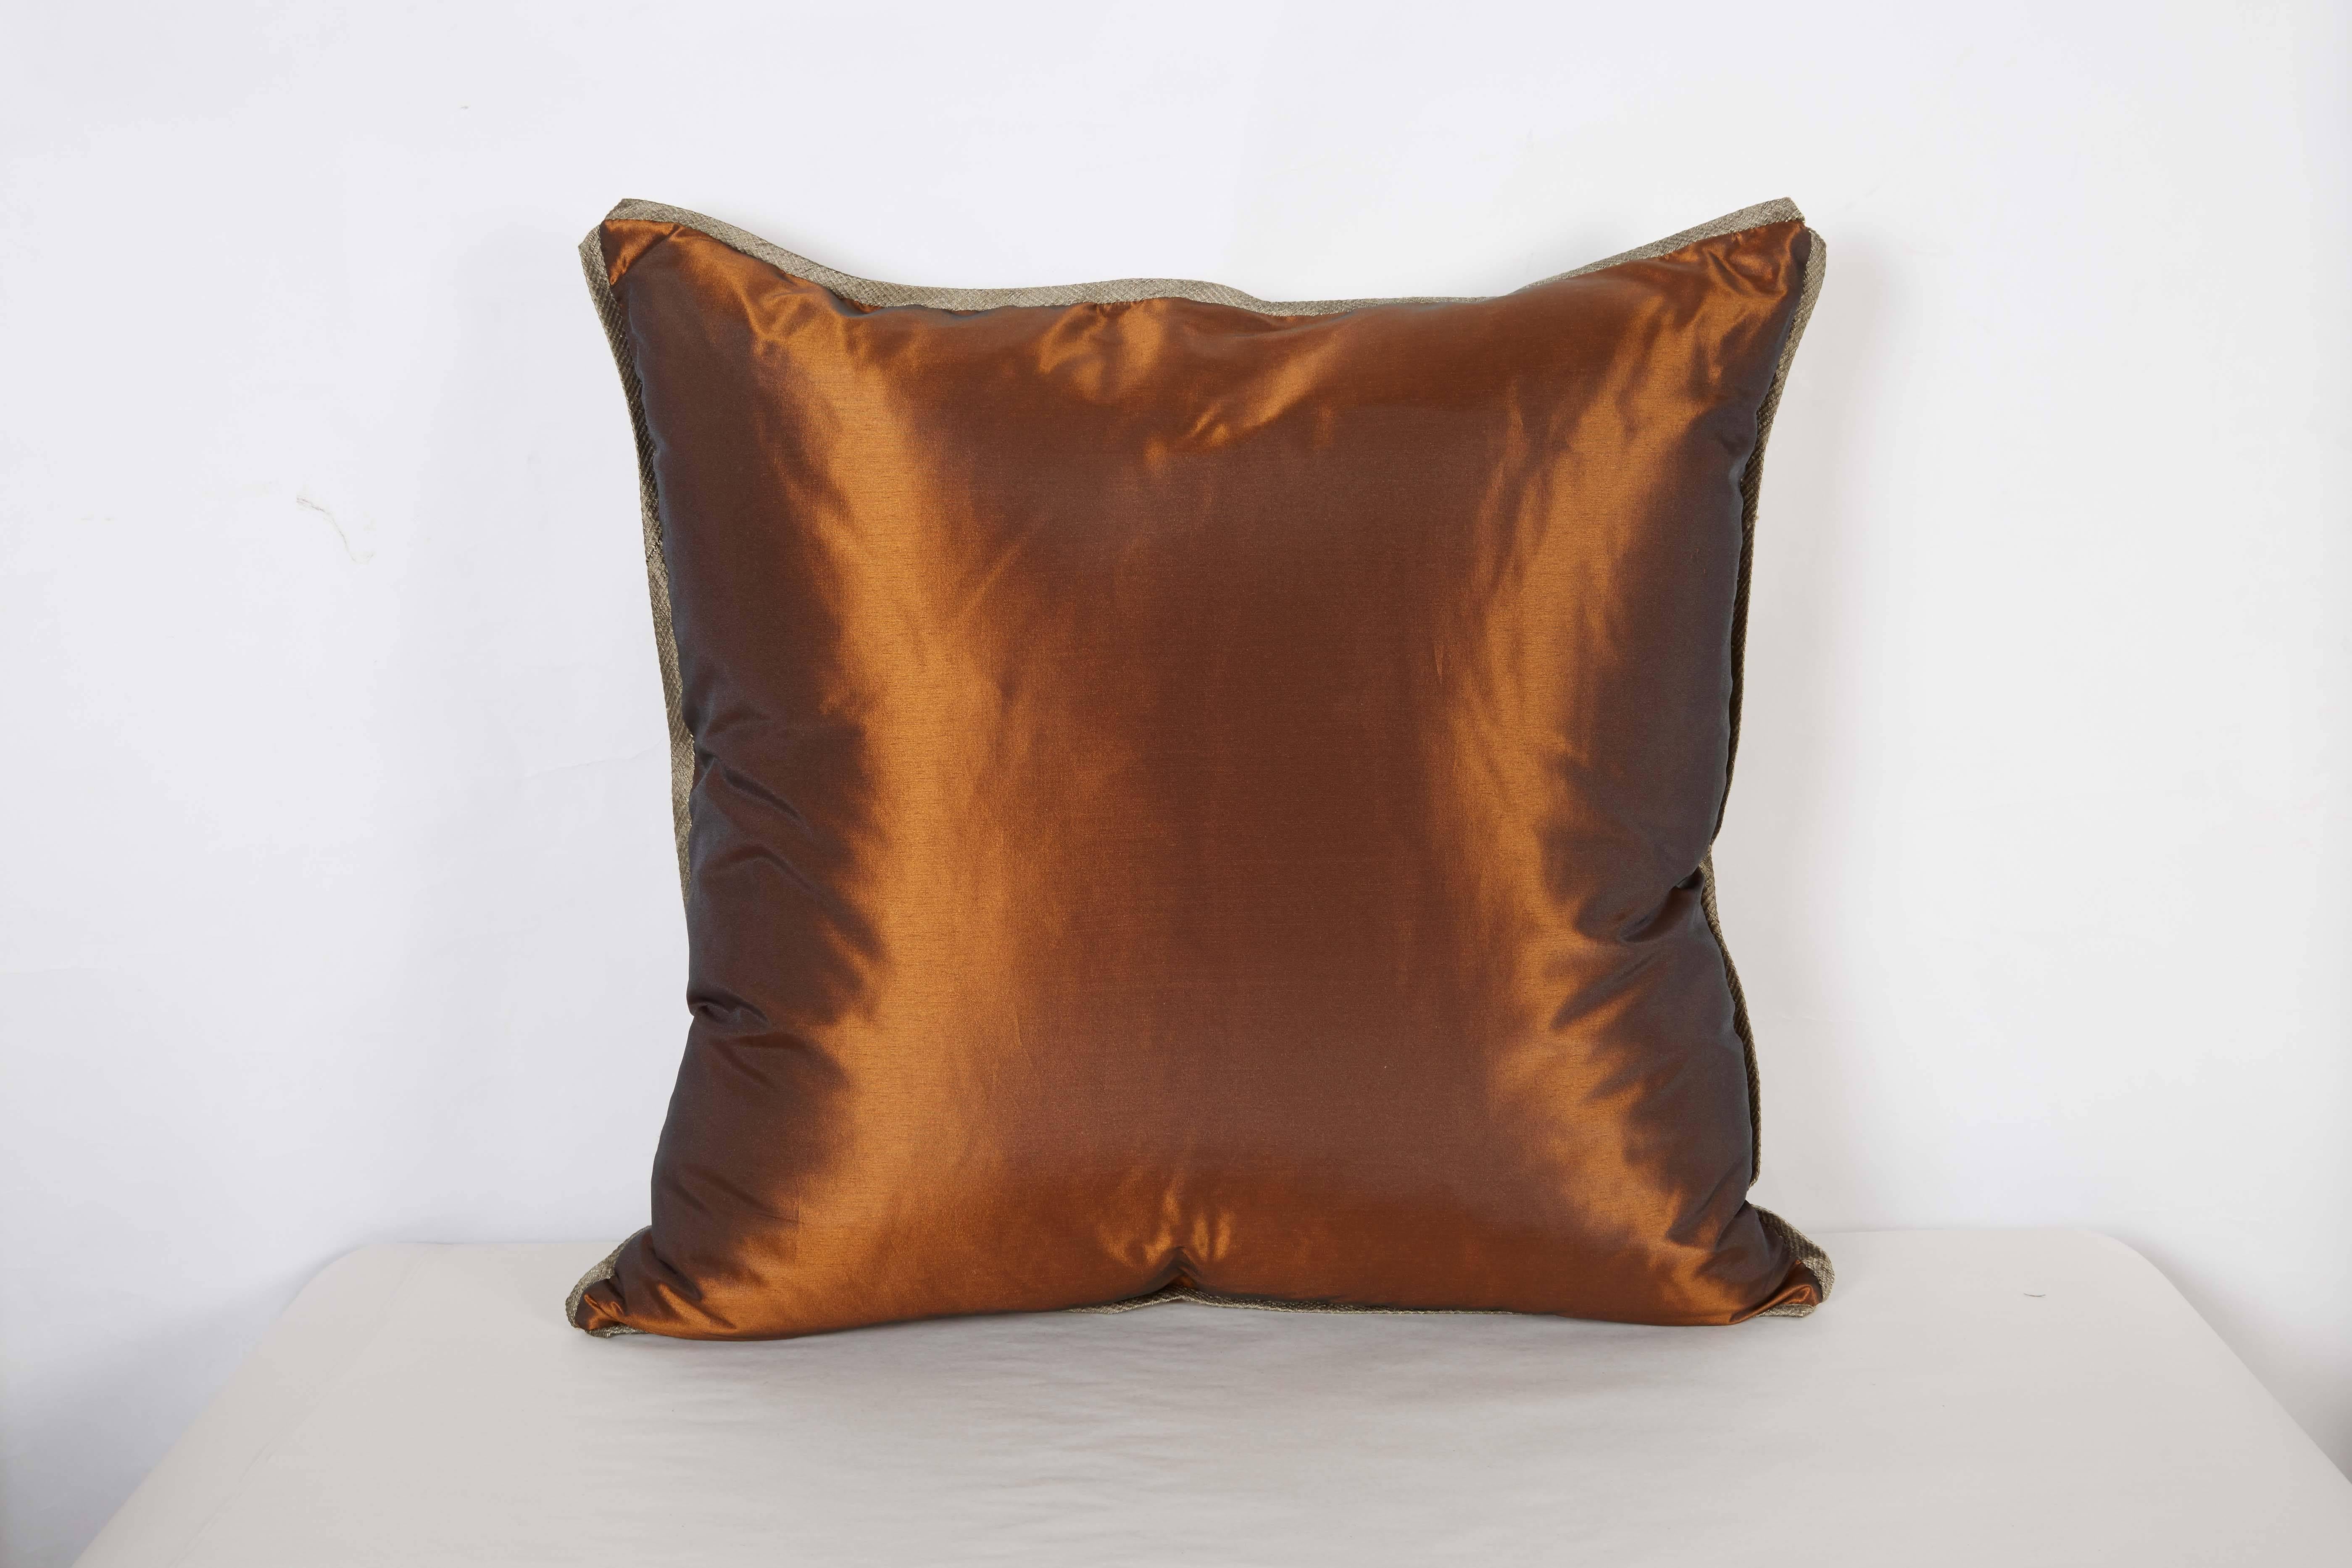 American A Pair of Fortuny Fabric Cushions in the Solimena Pattern